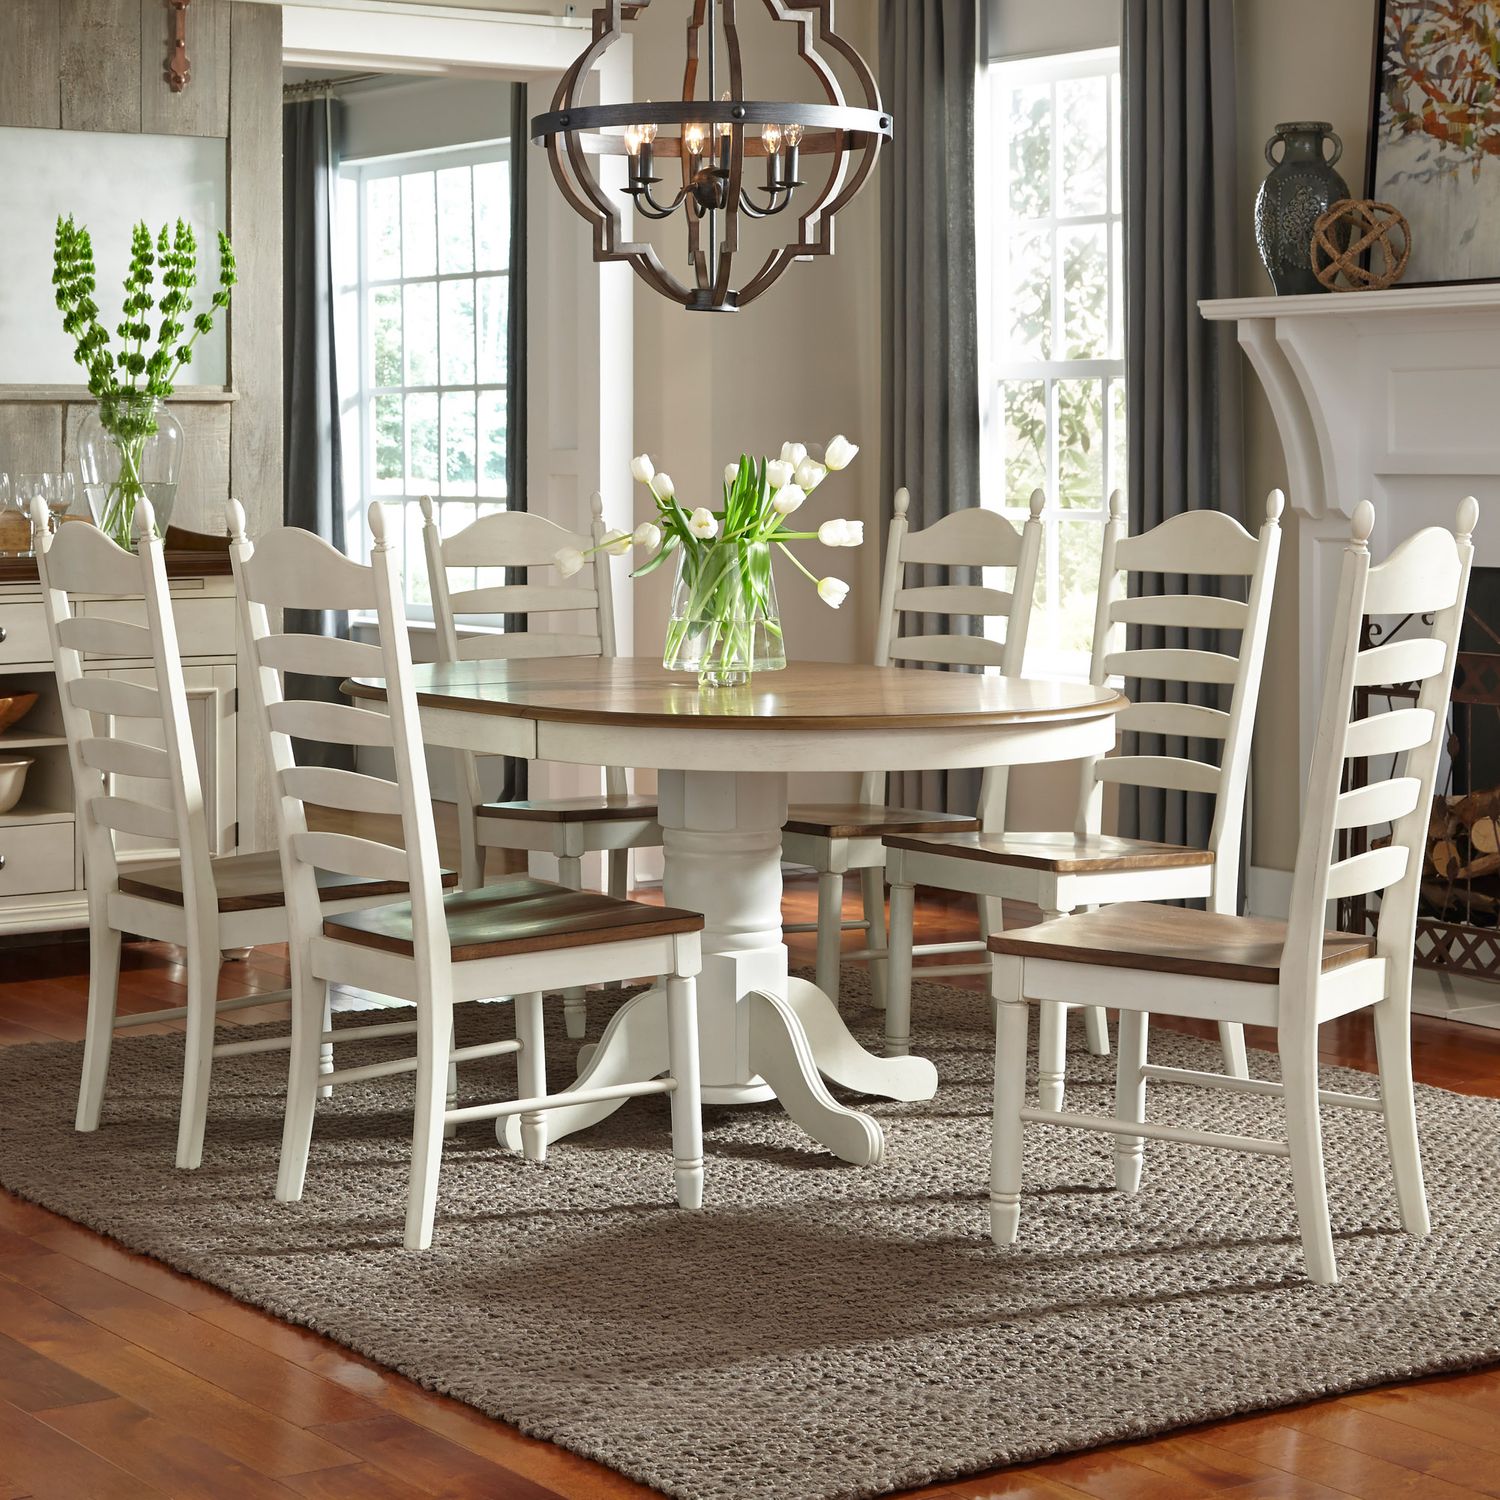 Springfield / 7 Piece Pedestal Table Set by Liberty Furniture